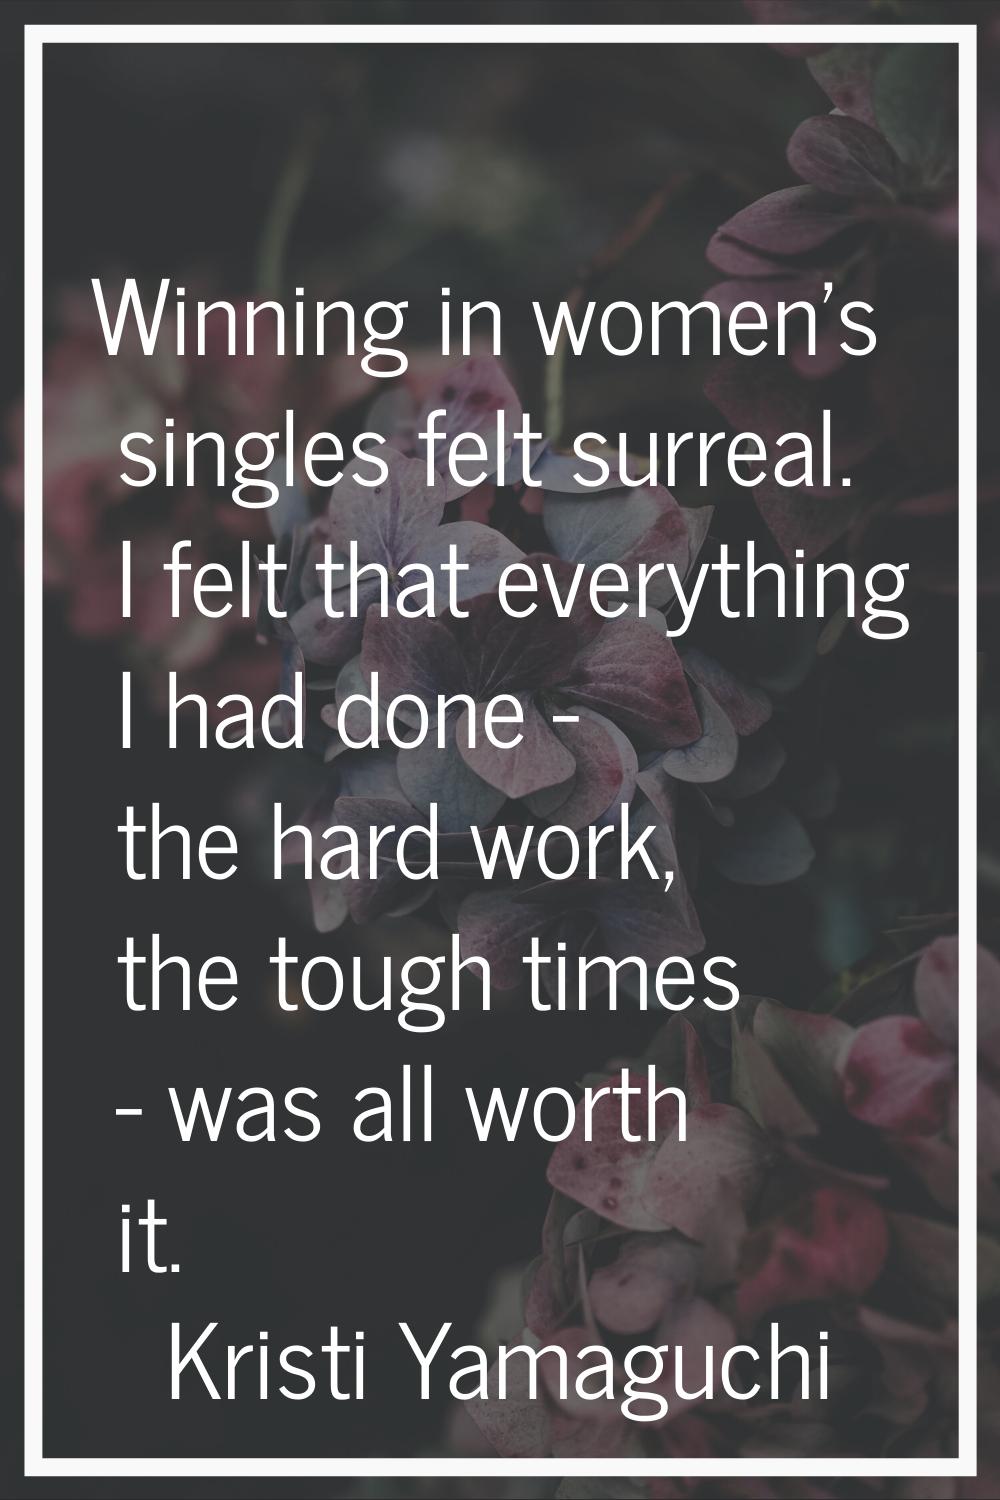 Winning in women's singles felt surreal. I felt that everything I had done - the hard work, the tou